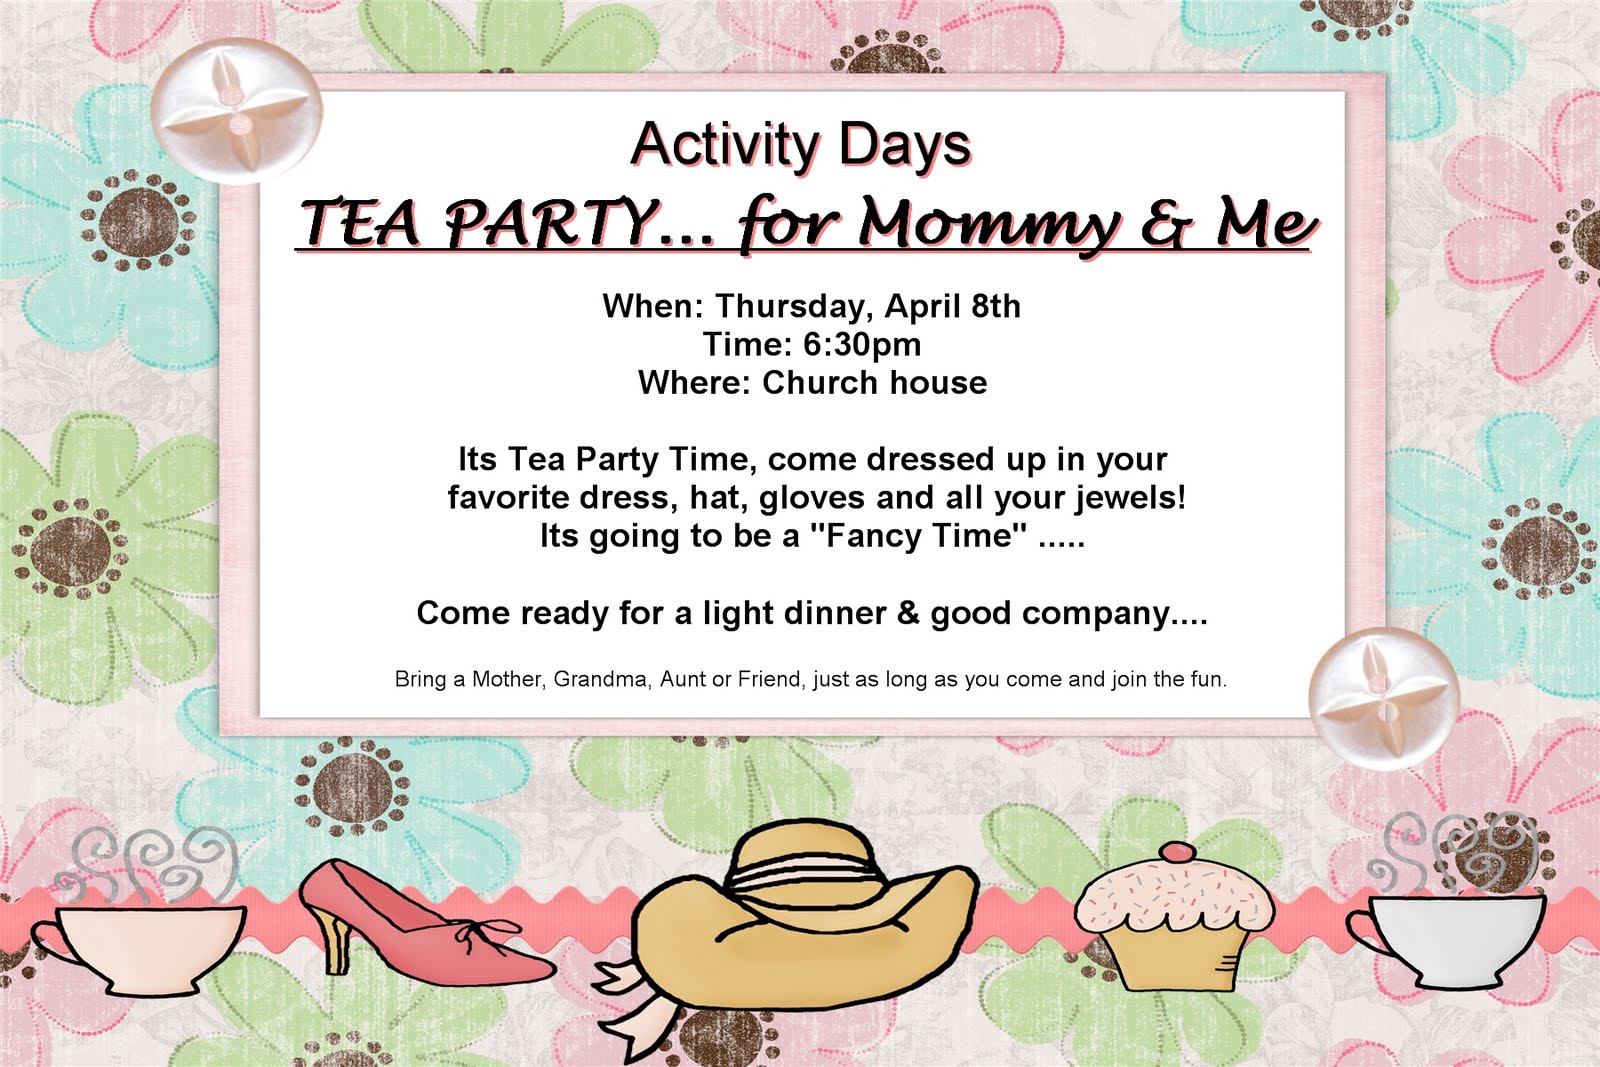 Lds Activity Day Ideas  Its A Tea Party      Mommy And Me Style